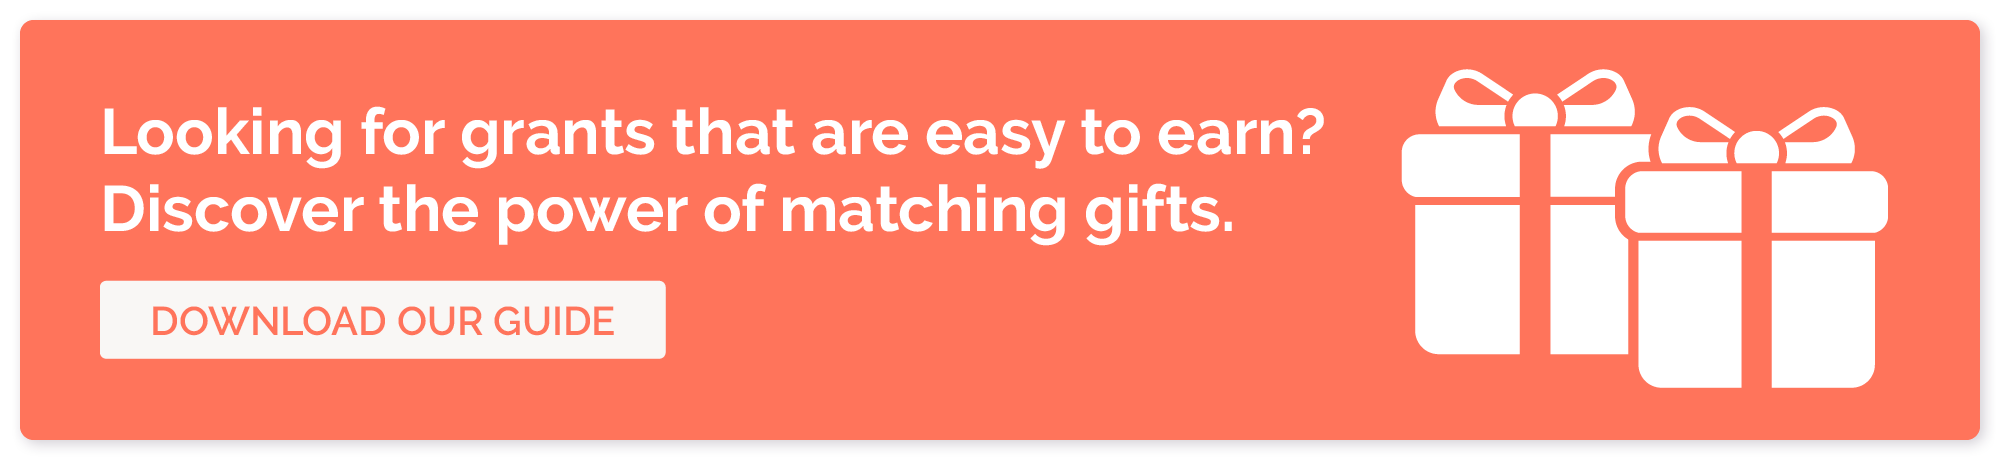 Looking for grants that are easy to earn? Discover the power of matching gifts. Download our guide.